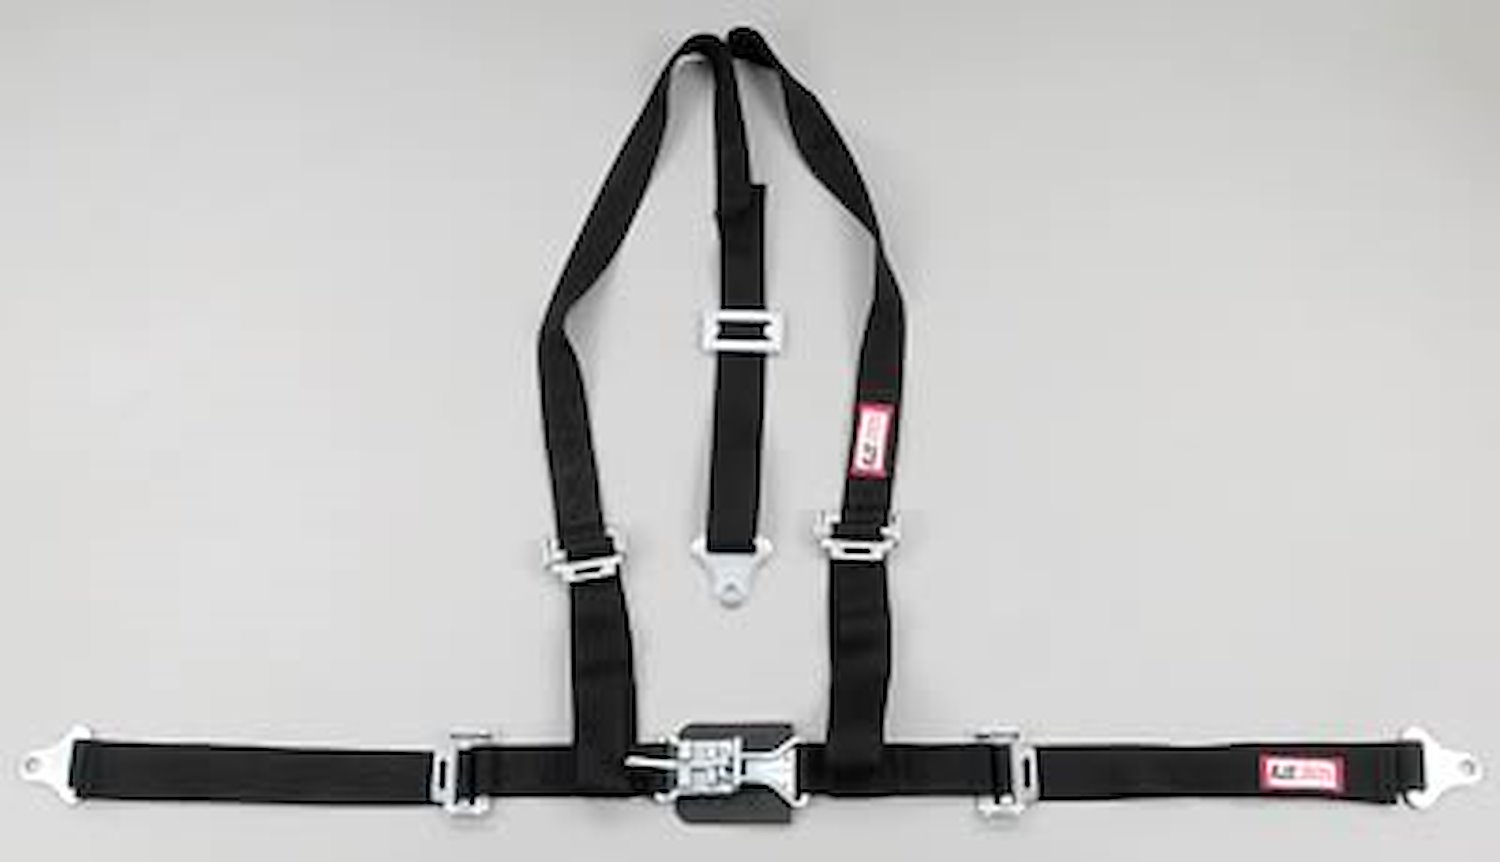 NON-SFI L&L HARNESS 2 PULL UP Lap Belt SEWN IN 2 S.H. V ROLL BAR Mount w/STERNUM STRAP ALL SNAP ENDS PURPLE